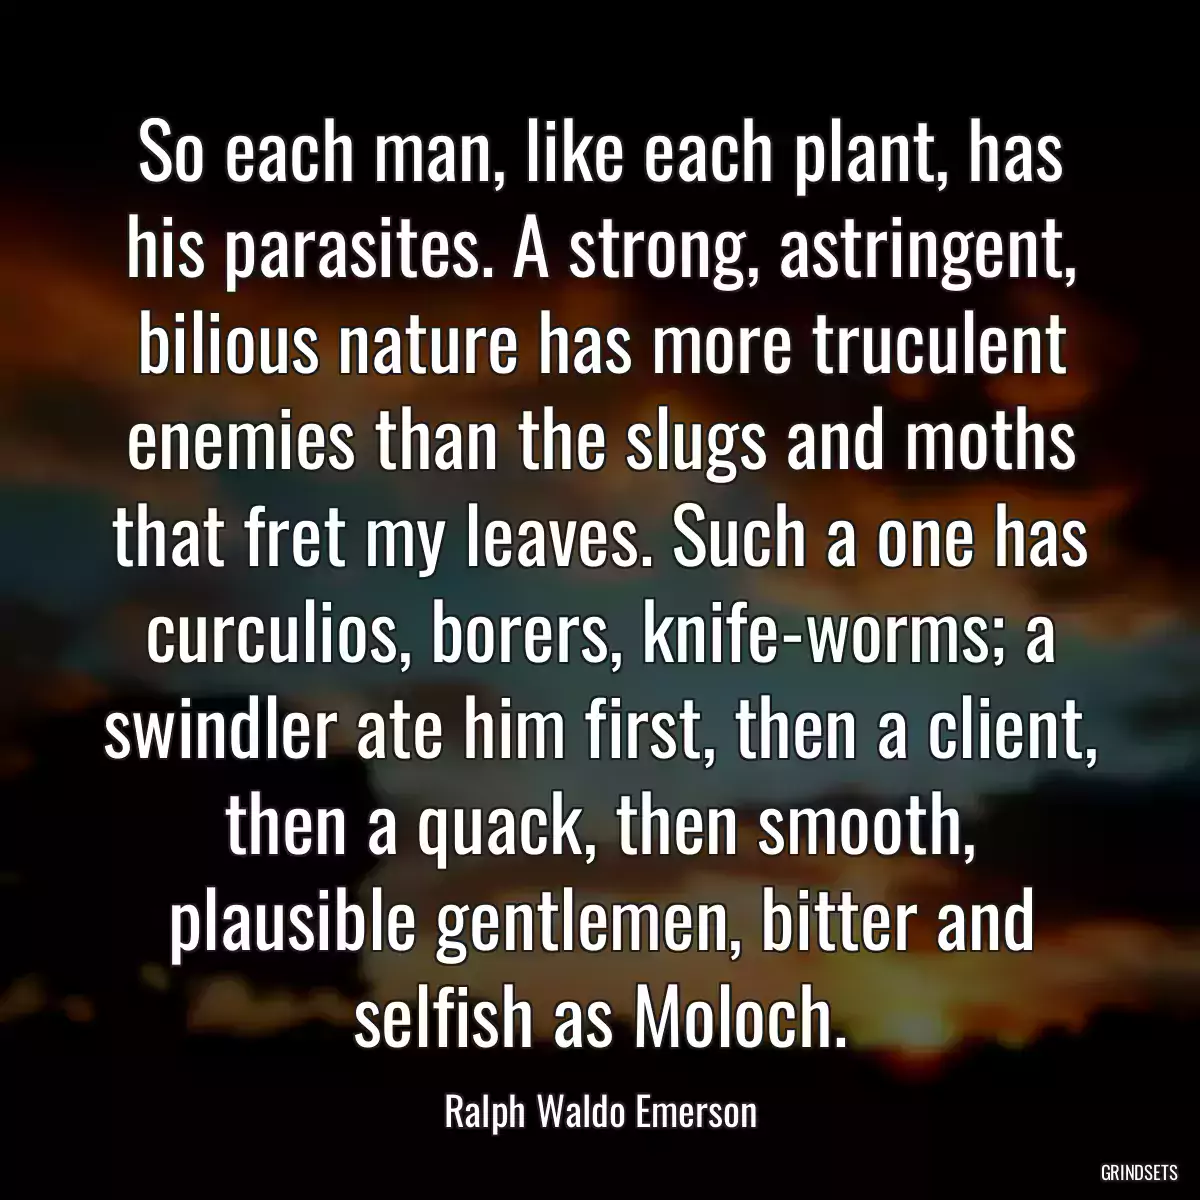 So each man, like each plant, has his parasites. A strong, astringent, bilious nature has more truculent enemies than the slugs and moths that fret my leaves. Such a one has curculios, borers, knife-worms; a swindler ate him first, then a client, then a quack, then smooth, plausible gentlemen, bitter and selfish as Moloch.